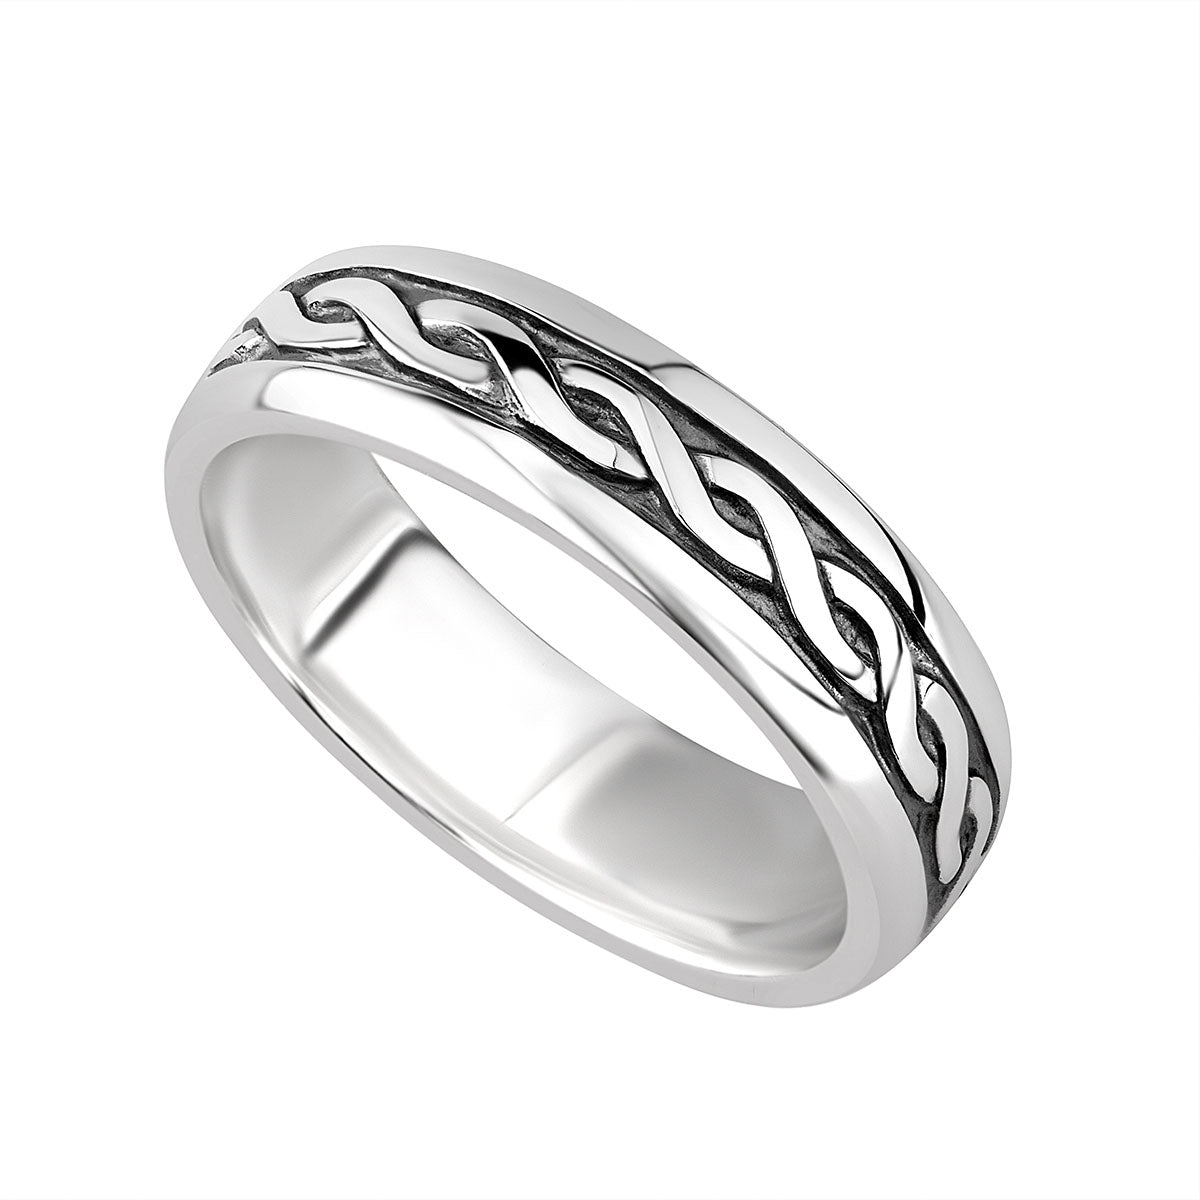 stock image of ladies sterling silver celtic ring s2648 from Solvar